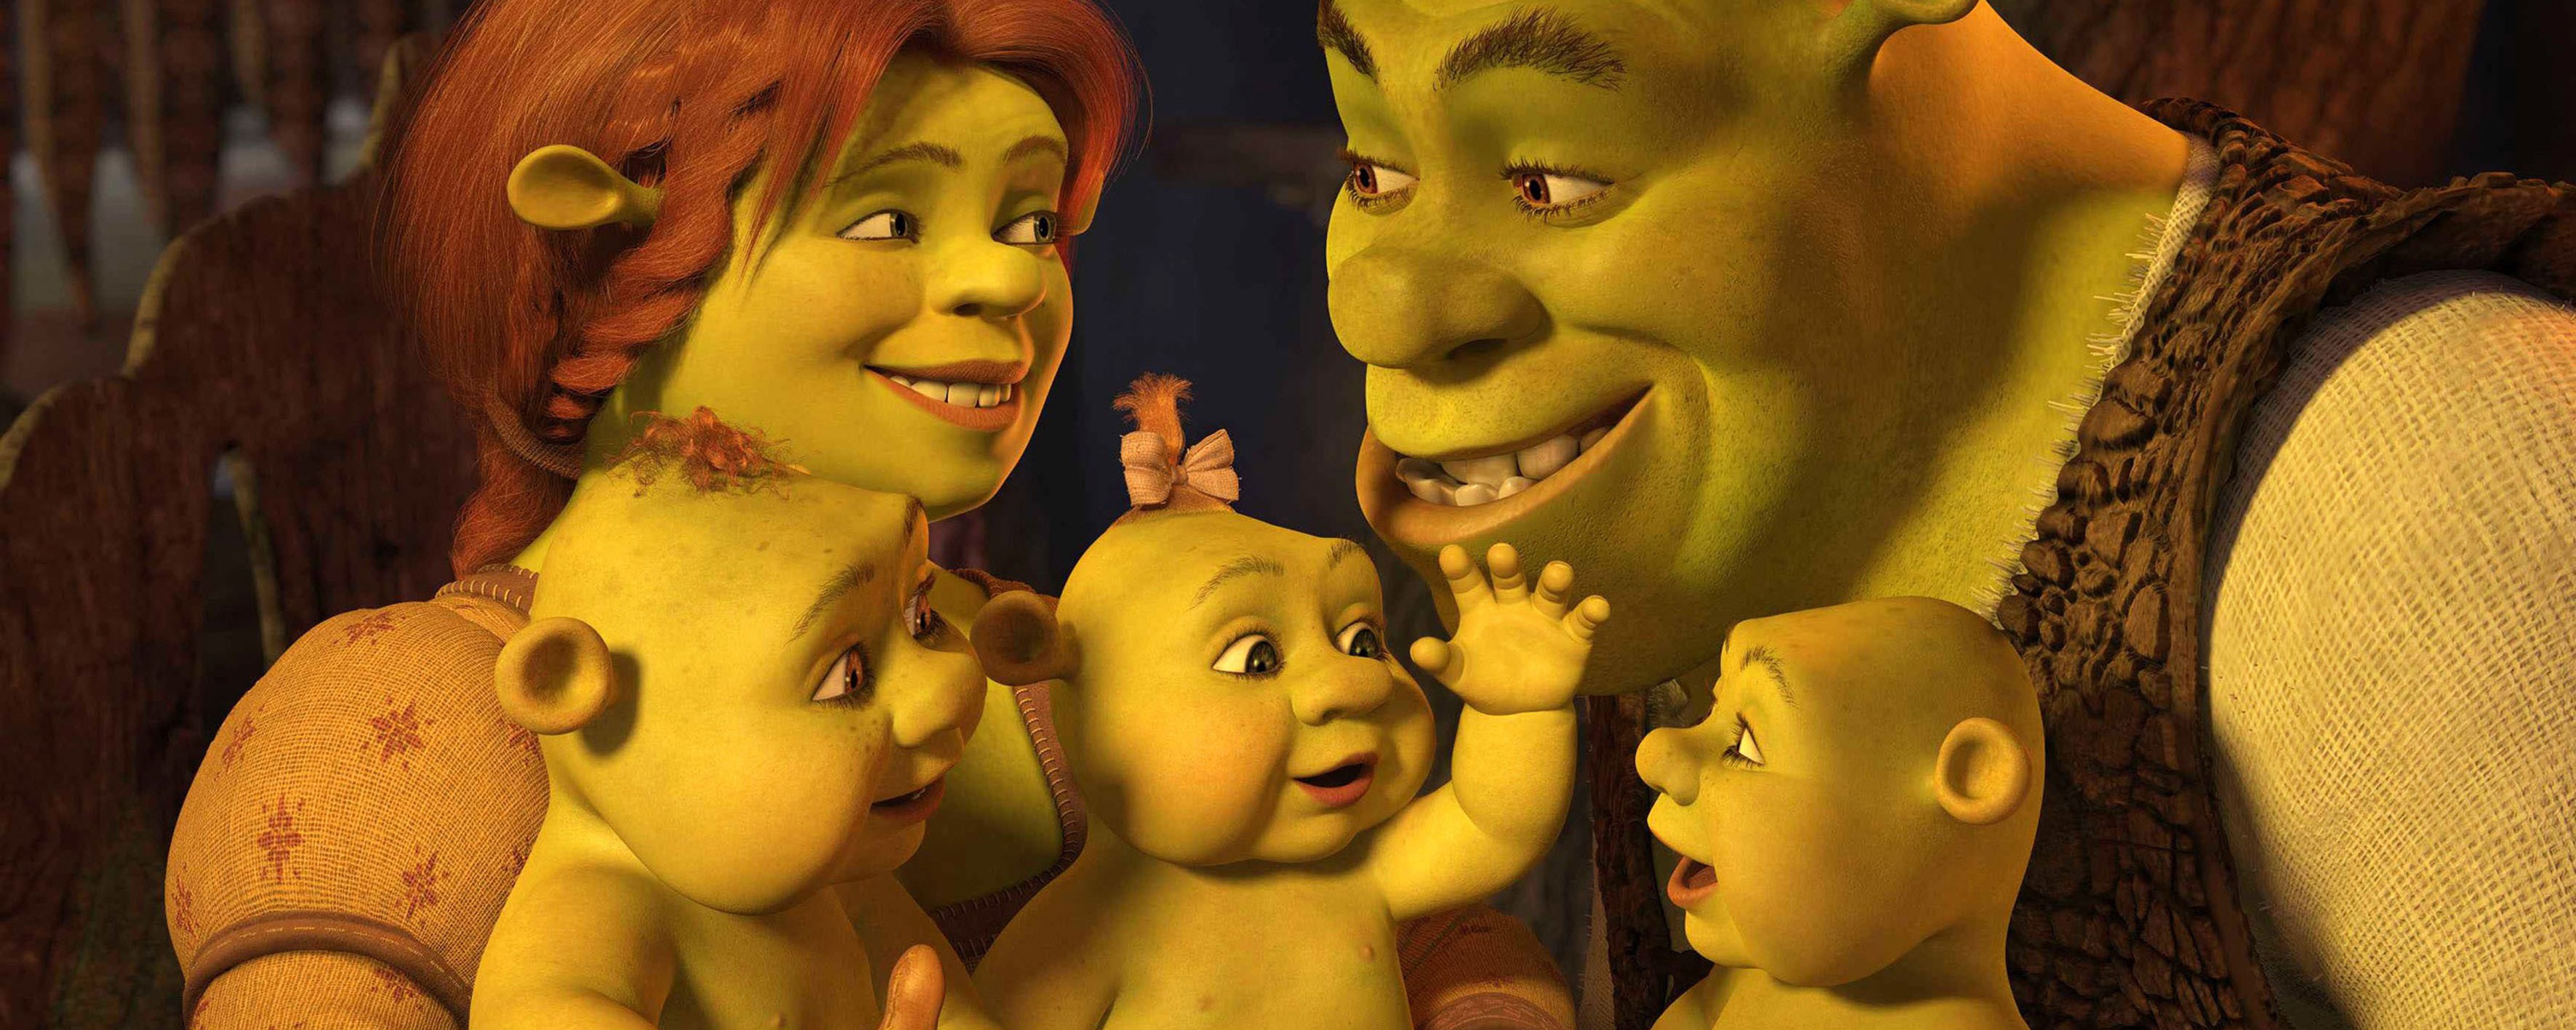 Shrek The Third Reviewed By Fans Its Best Scene And Cast Members